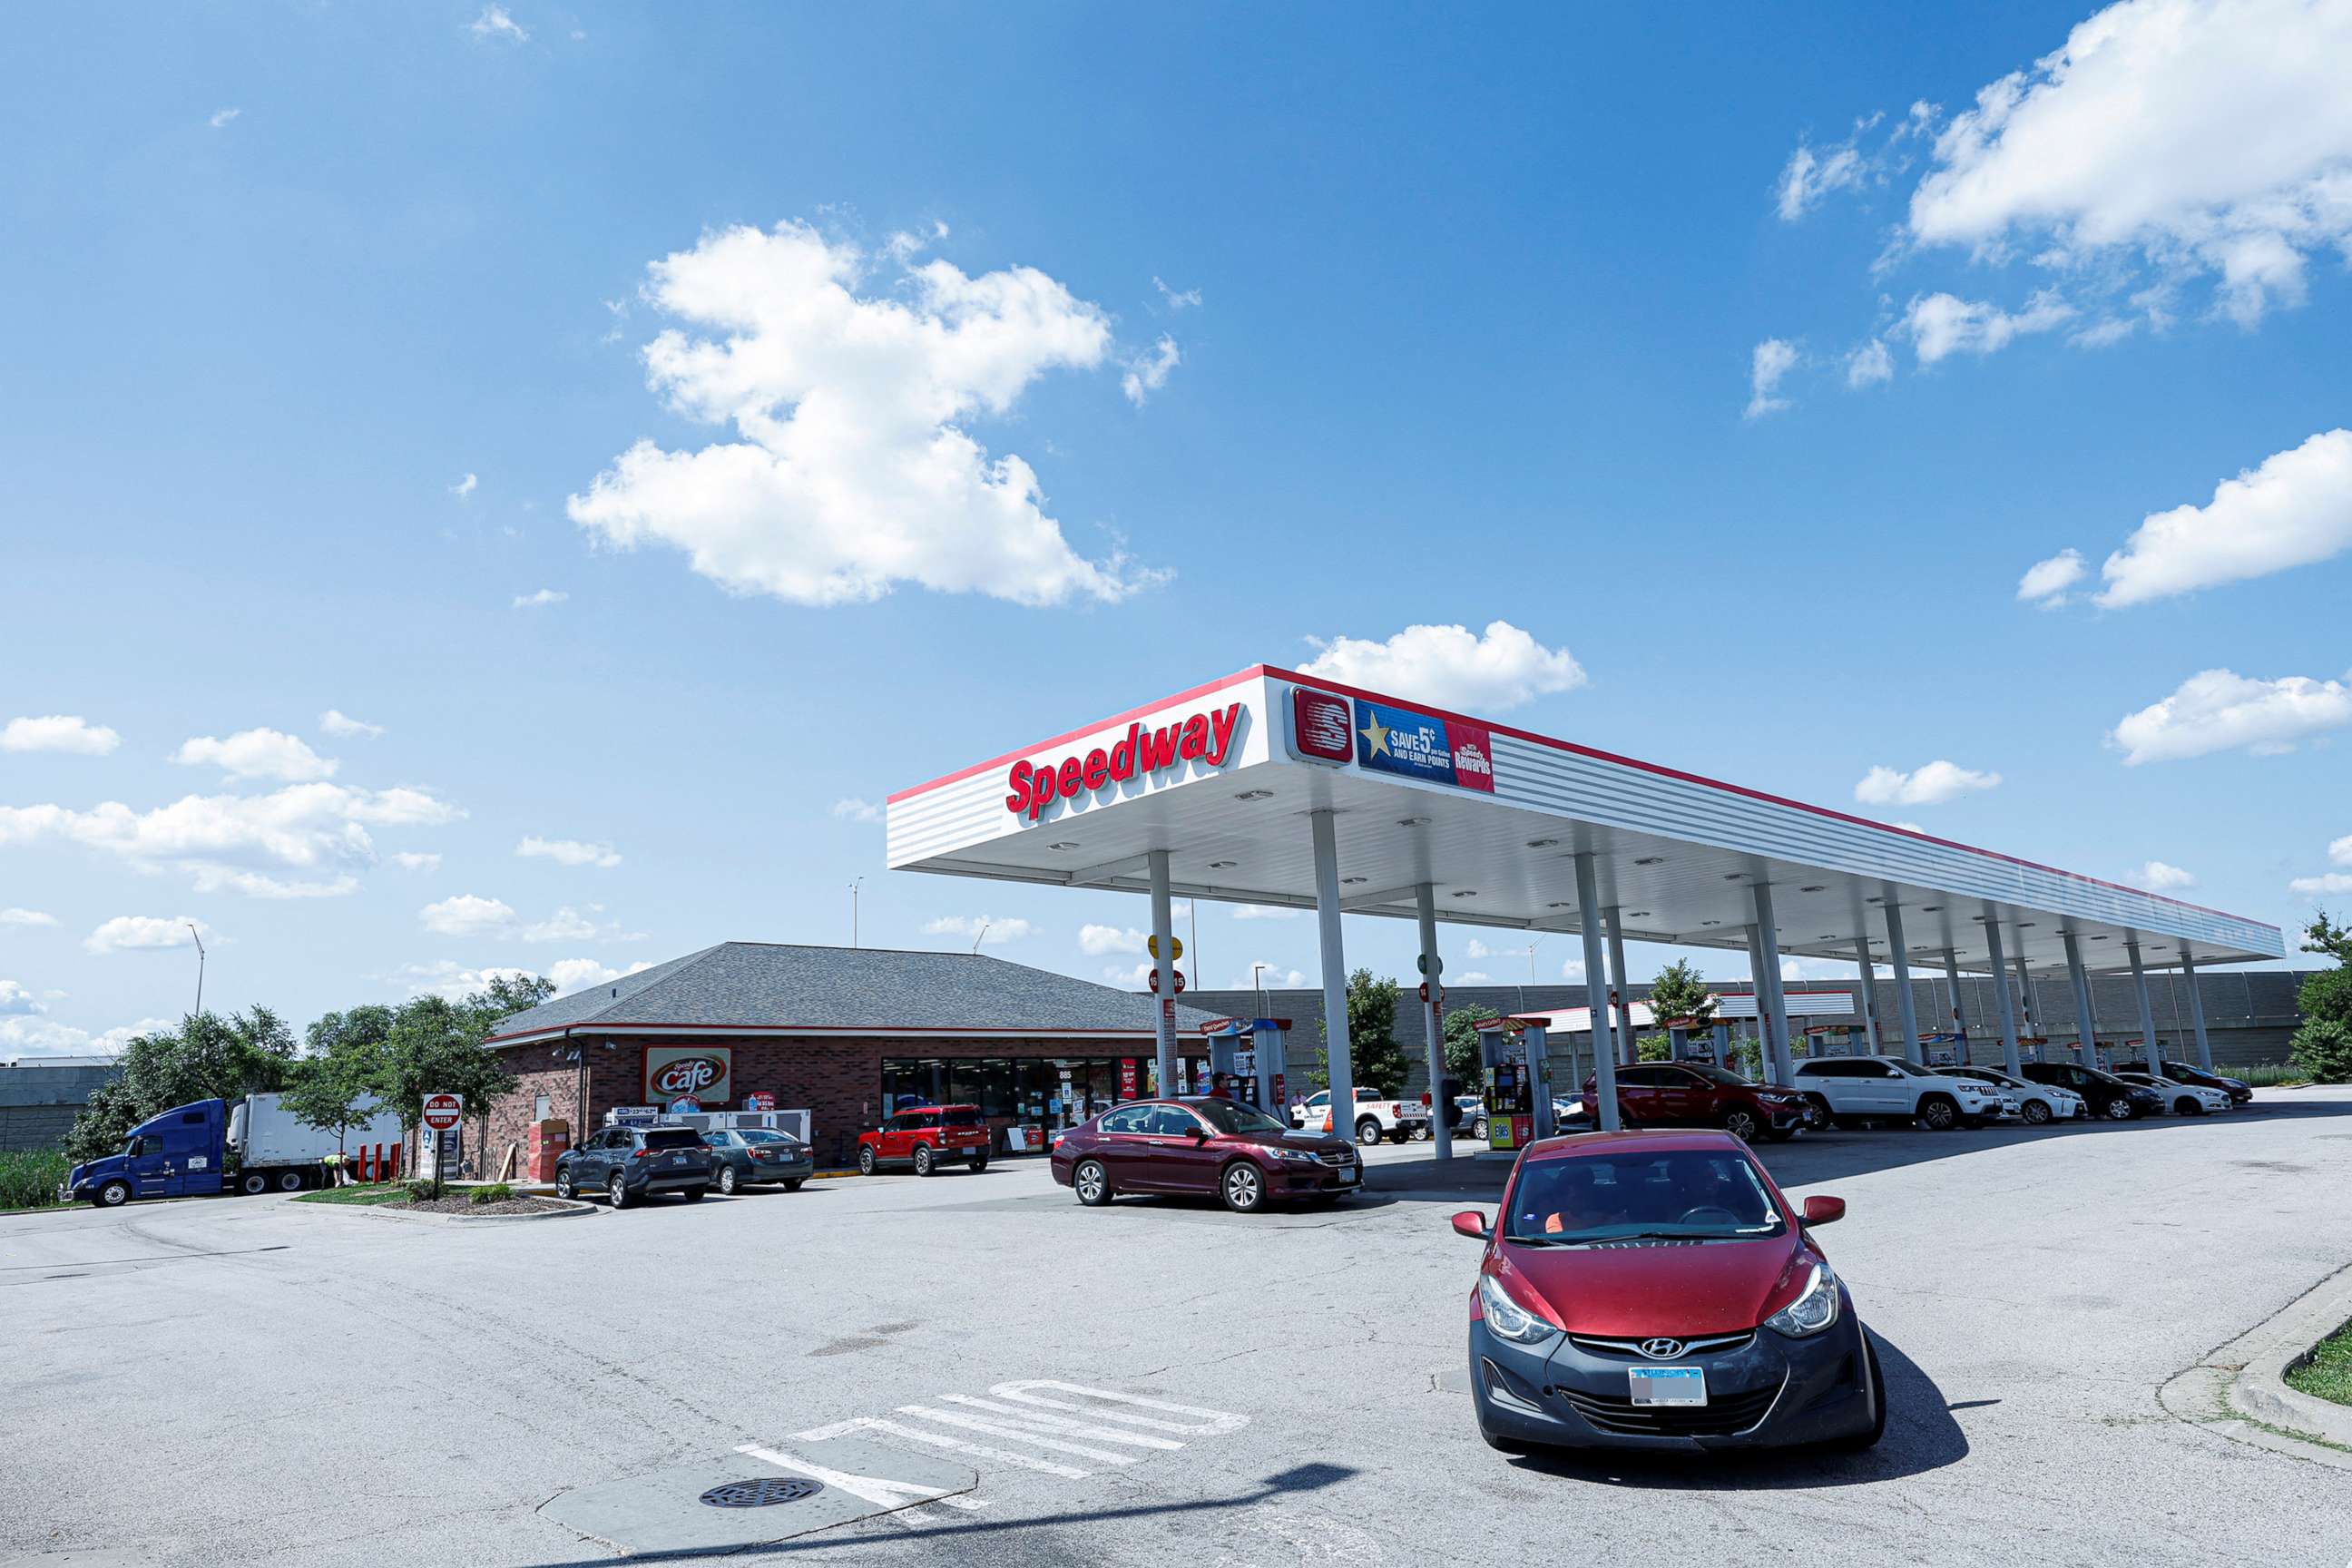 PHOTO: A view of the Speedway gas station where the winning ticket for the Mega Millions lottery jackpot was sold, in Des Plaines, Ill., July 30, 2022.